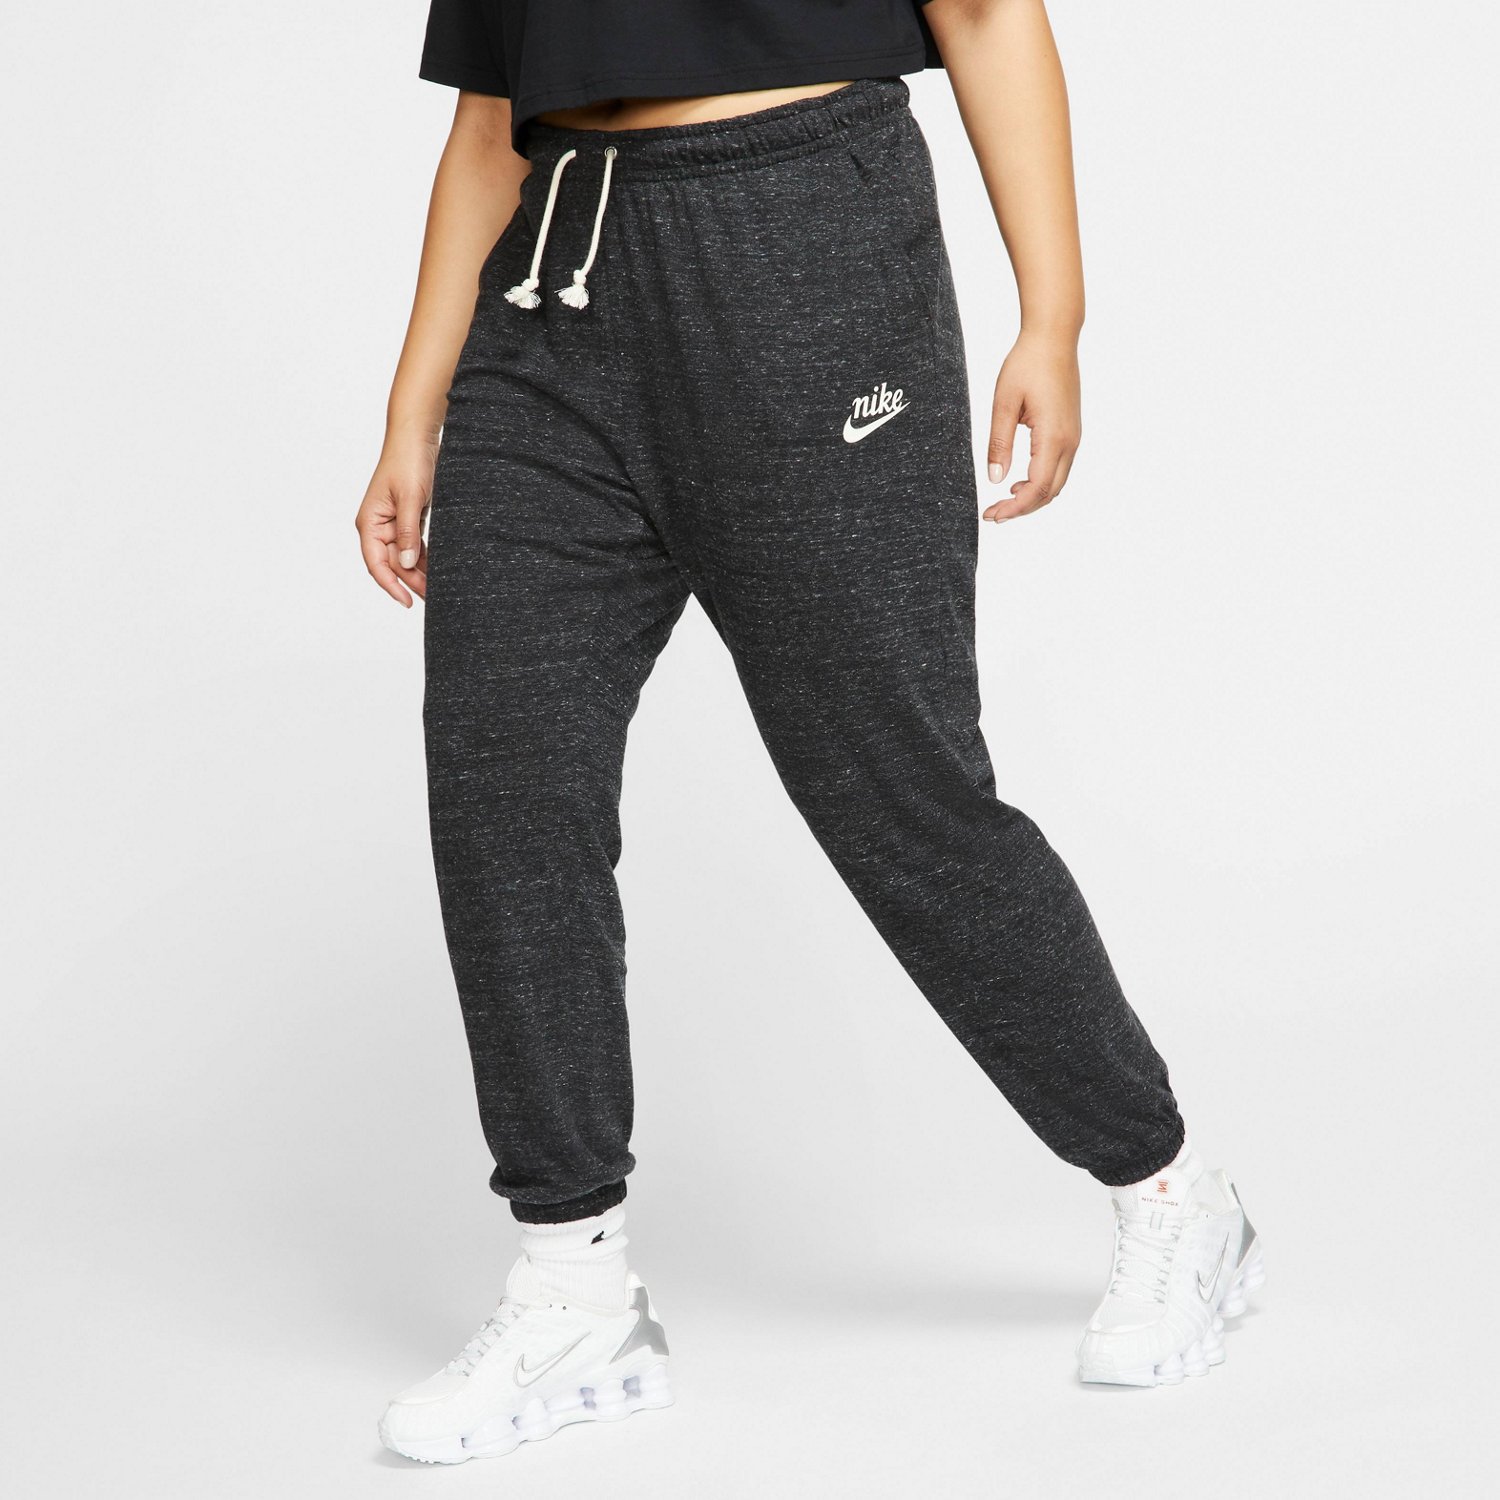 nike pants outfit